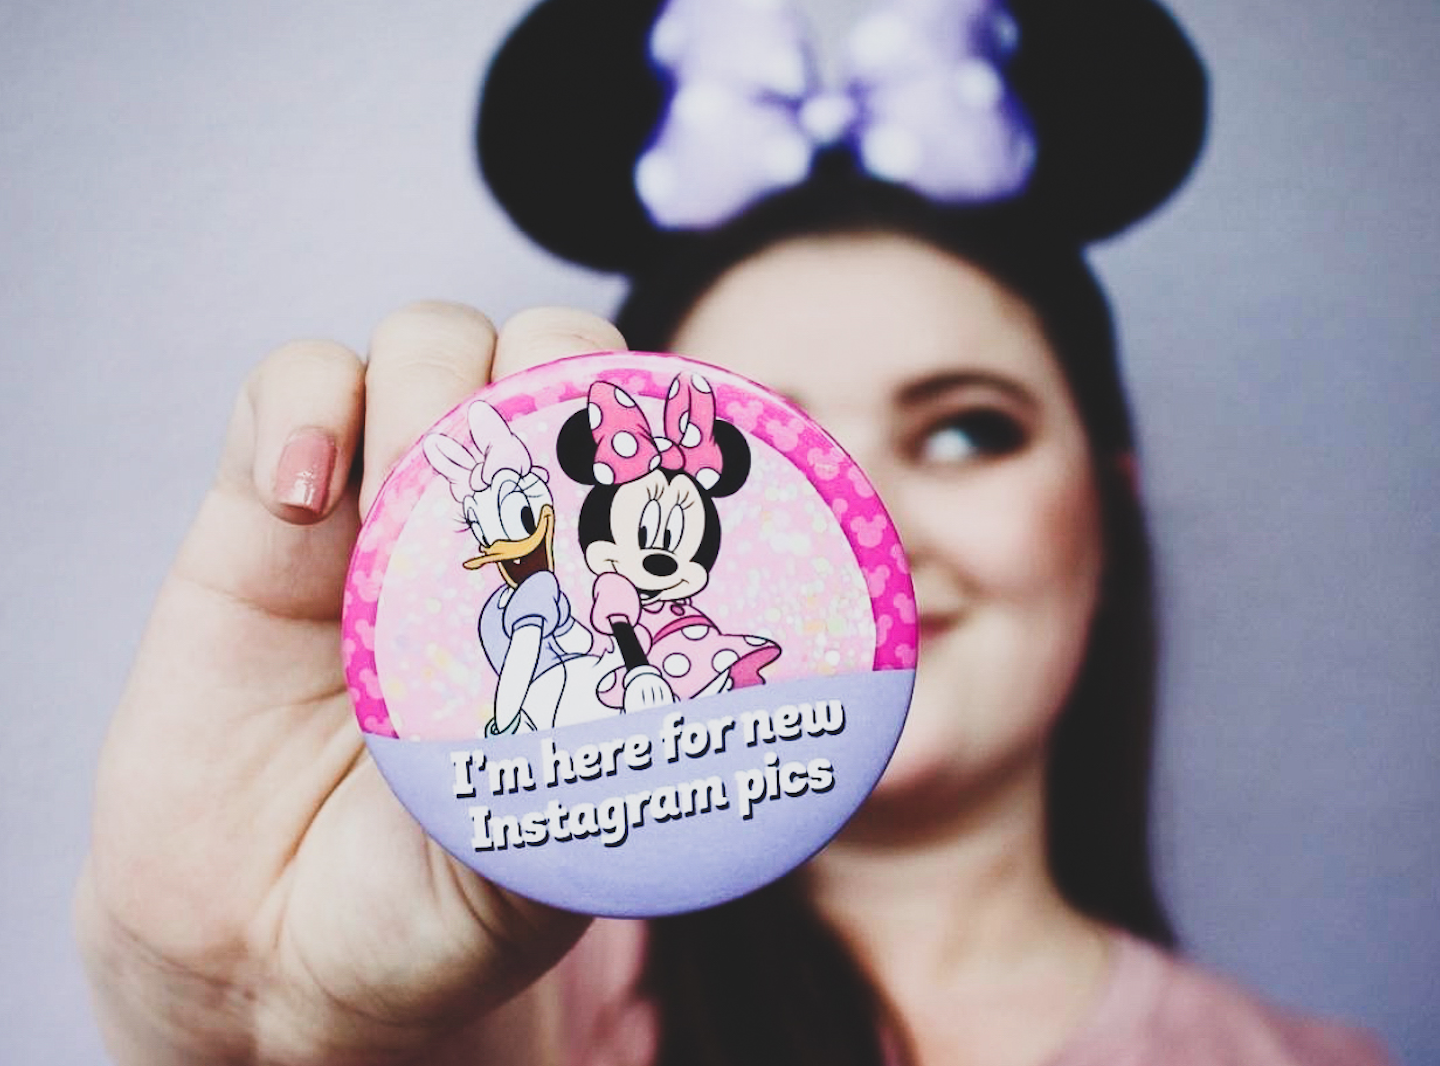 Girl holding Instagram Minnie and Daisy Disney Button